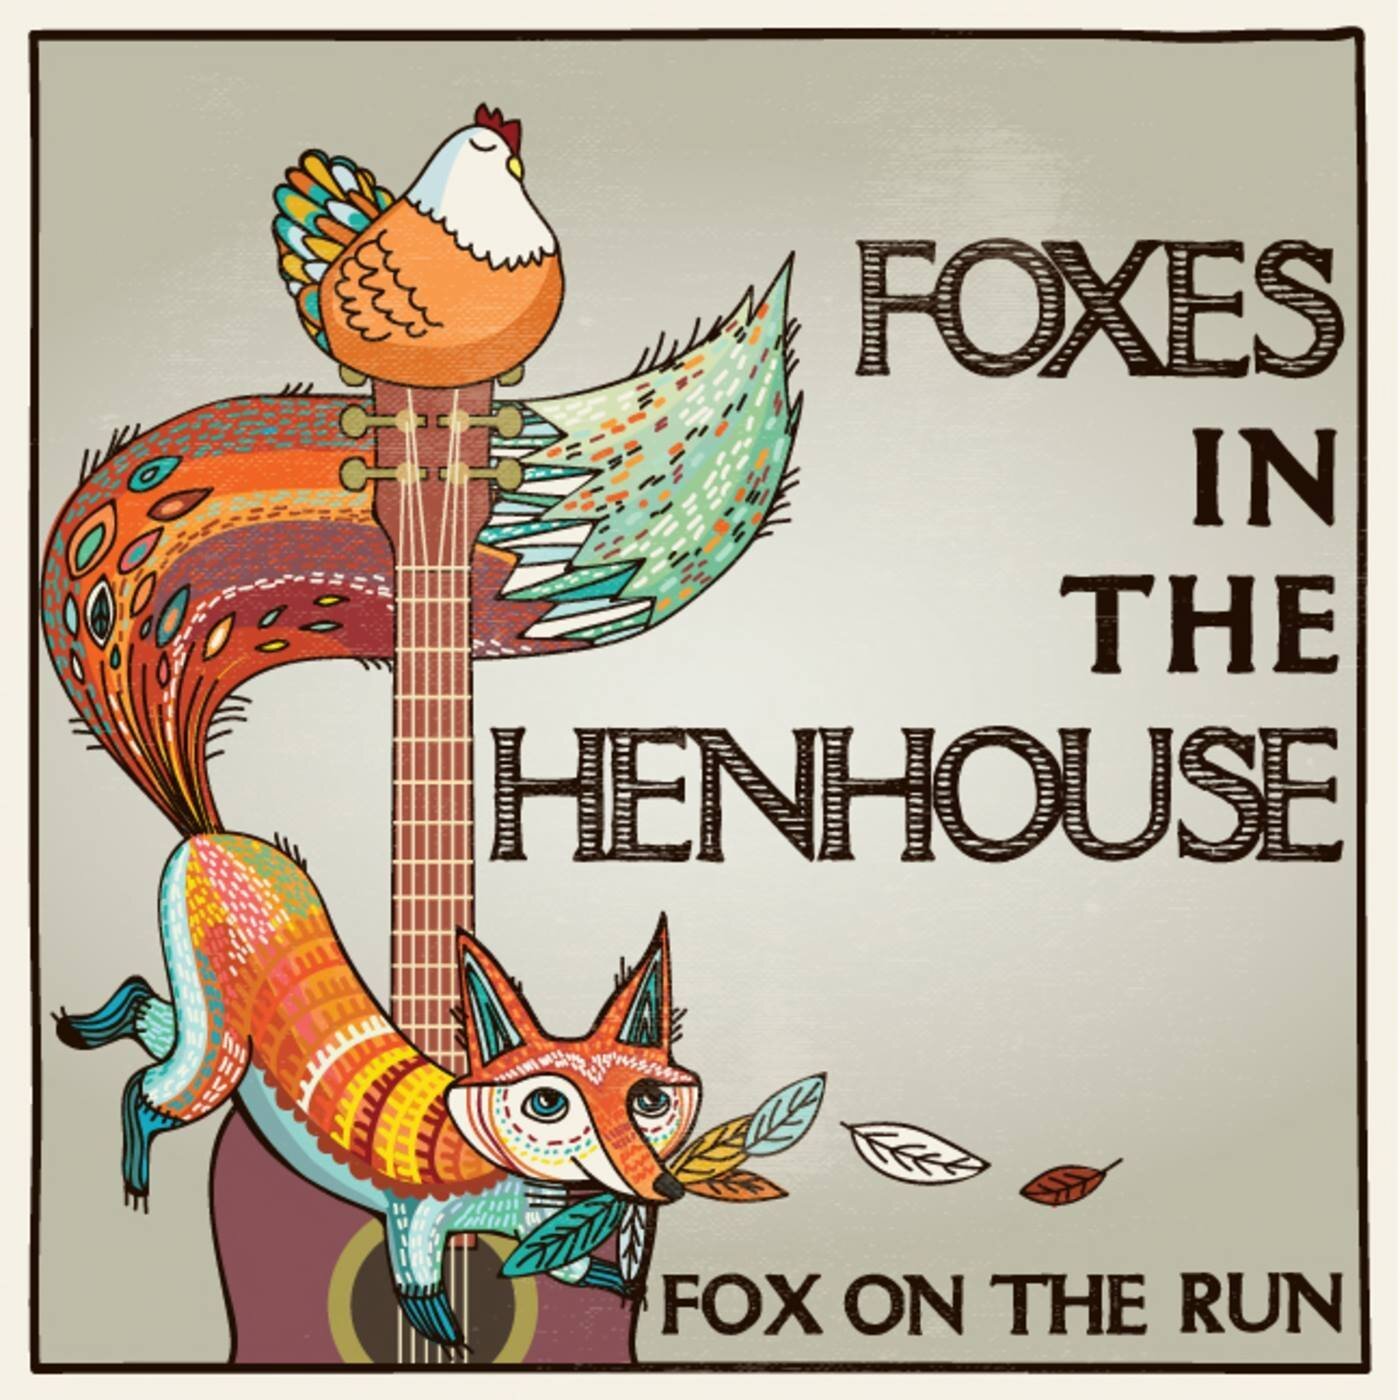 6/19/20 - Foxes in the Henhouse